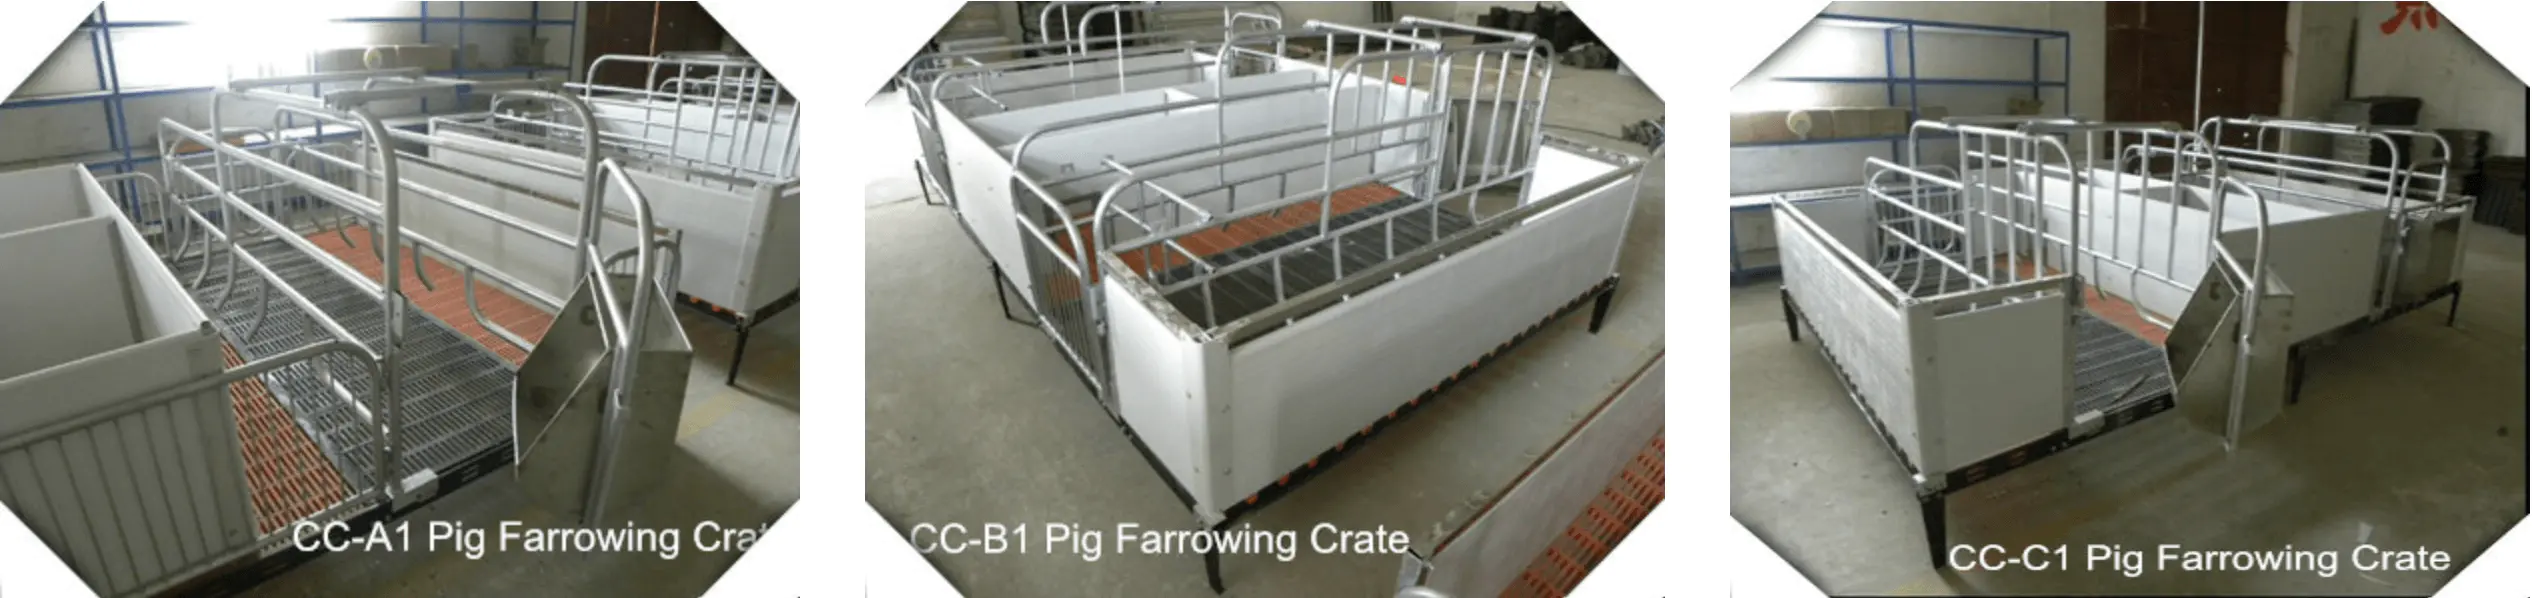 3 Models of Pig Farrowing Crates & Conjoined Pig Farrowing Crate